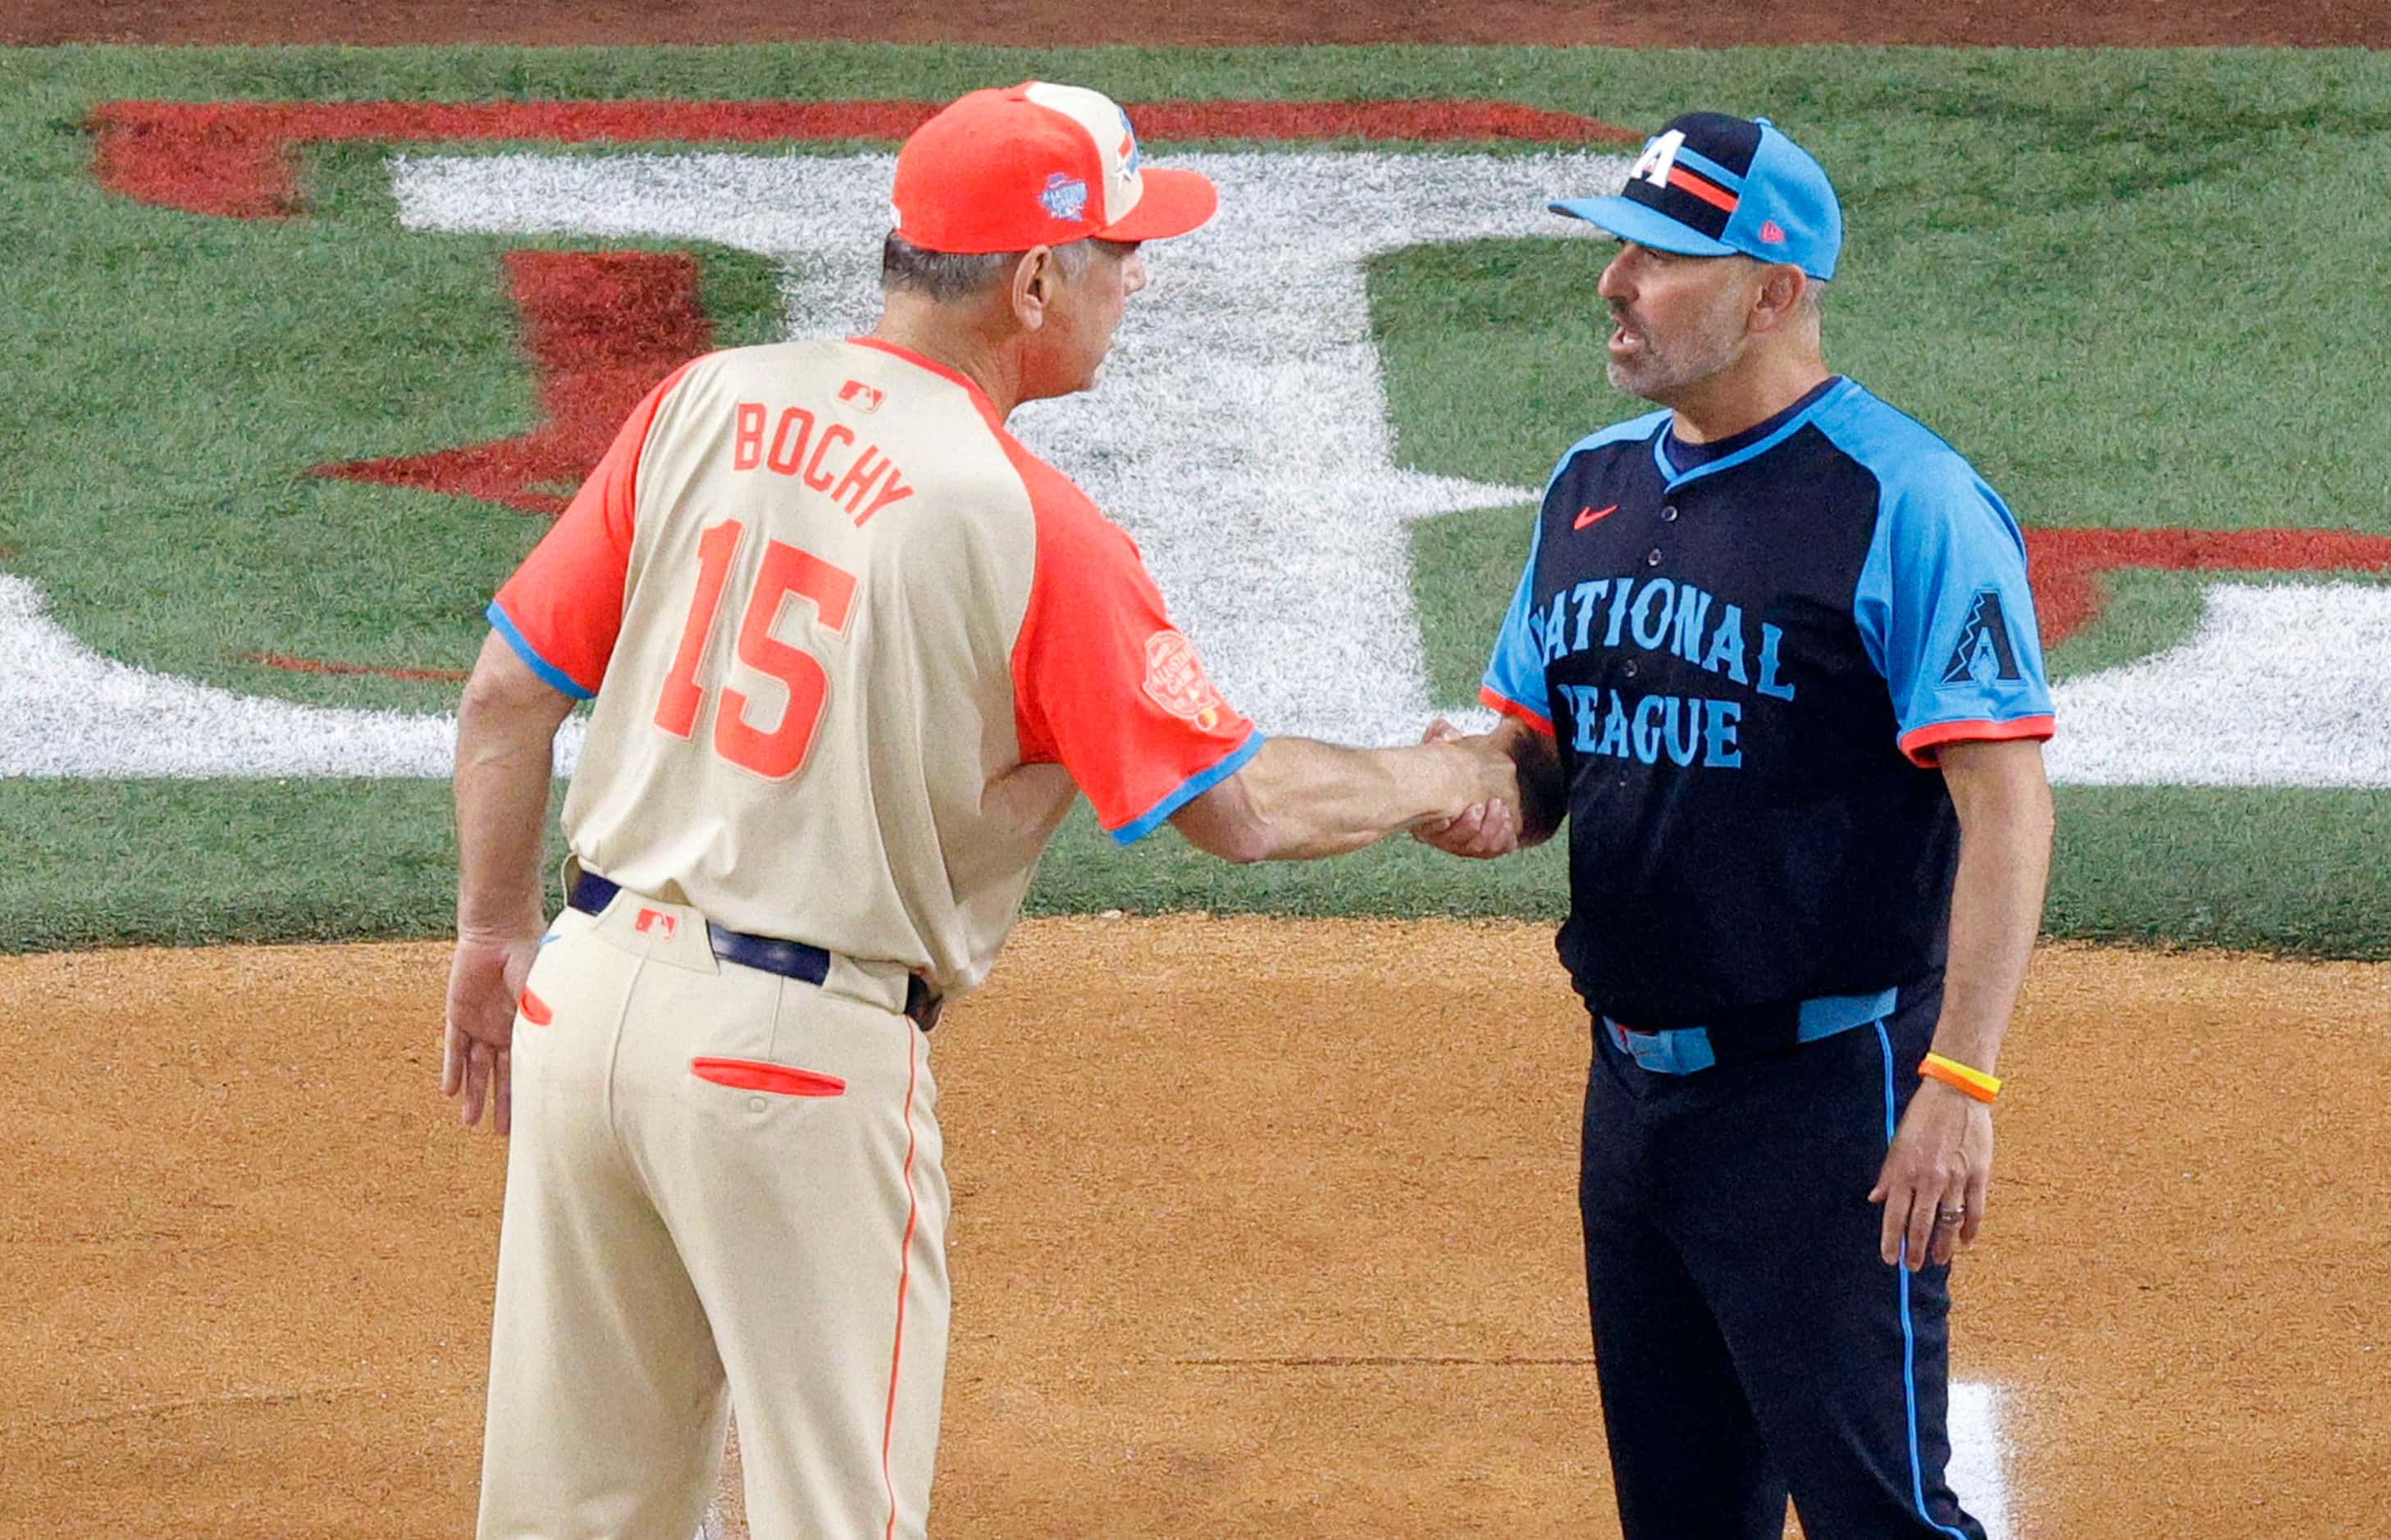 American League manager Bruce Bochy of Texas Rangers (15) shakes hands with National League...